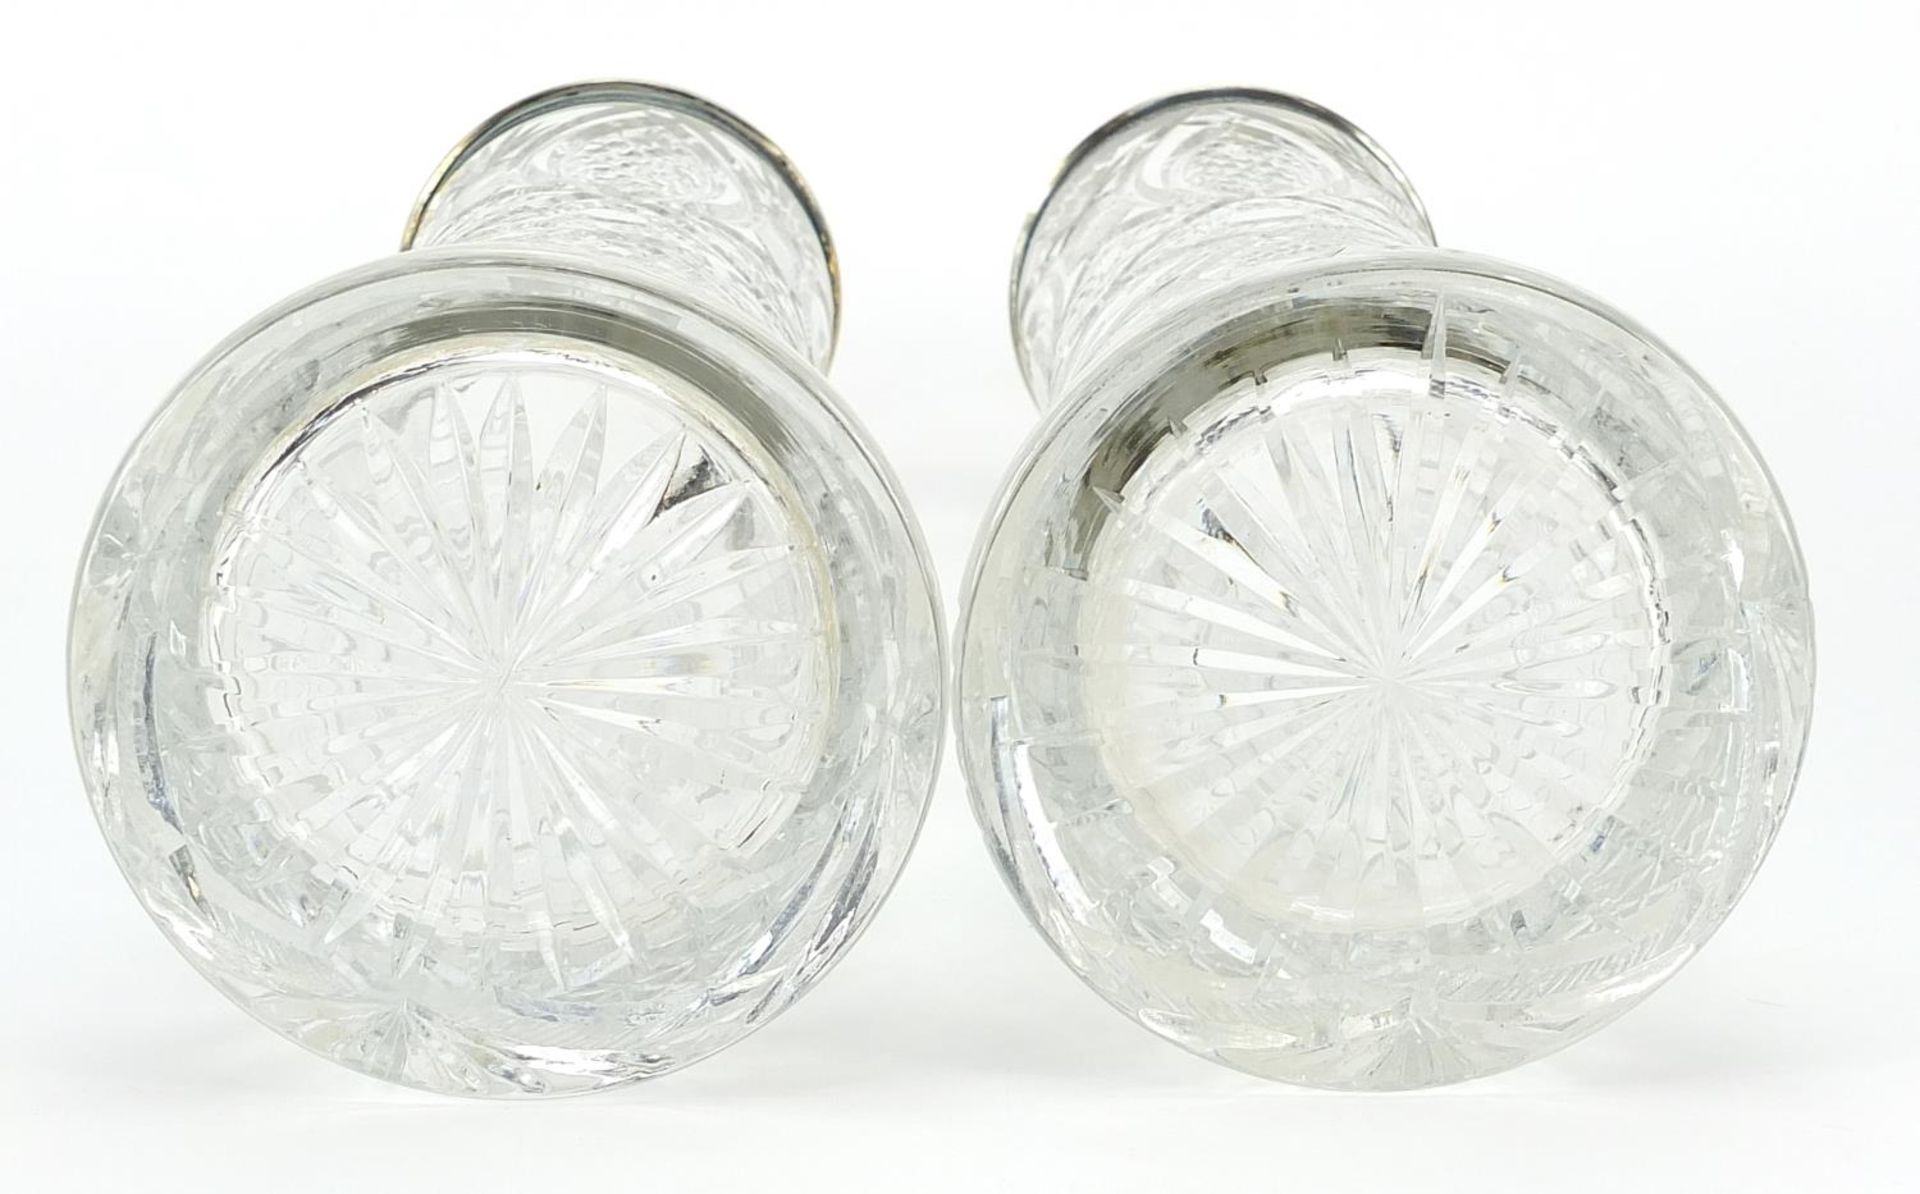 Russian cut vases with silver collars, impressed Russian marks 2MO 875 with hammer and sickle, 28. - Image 3 of 5